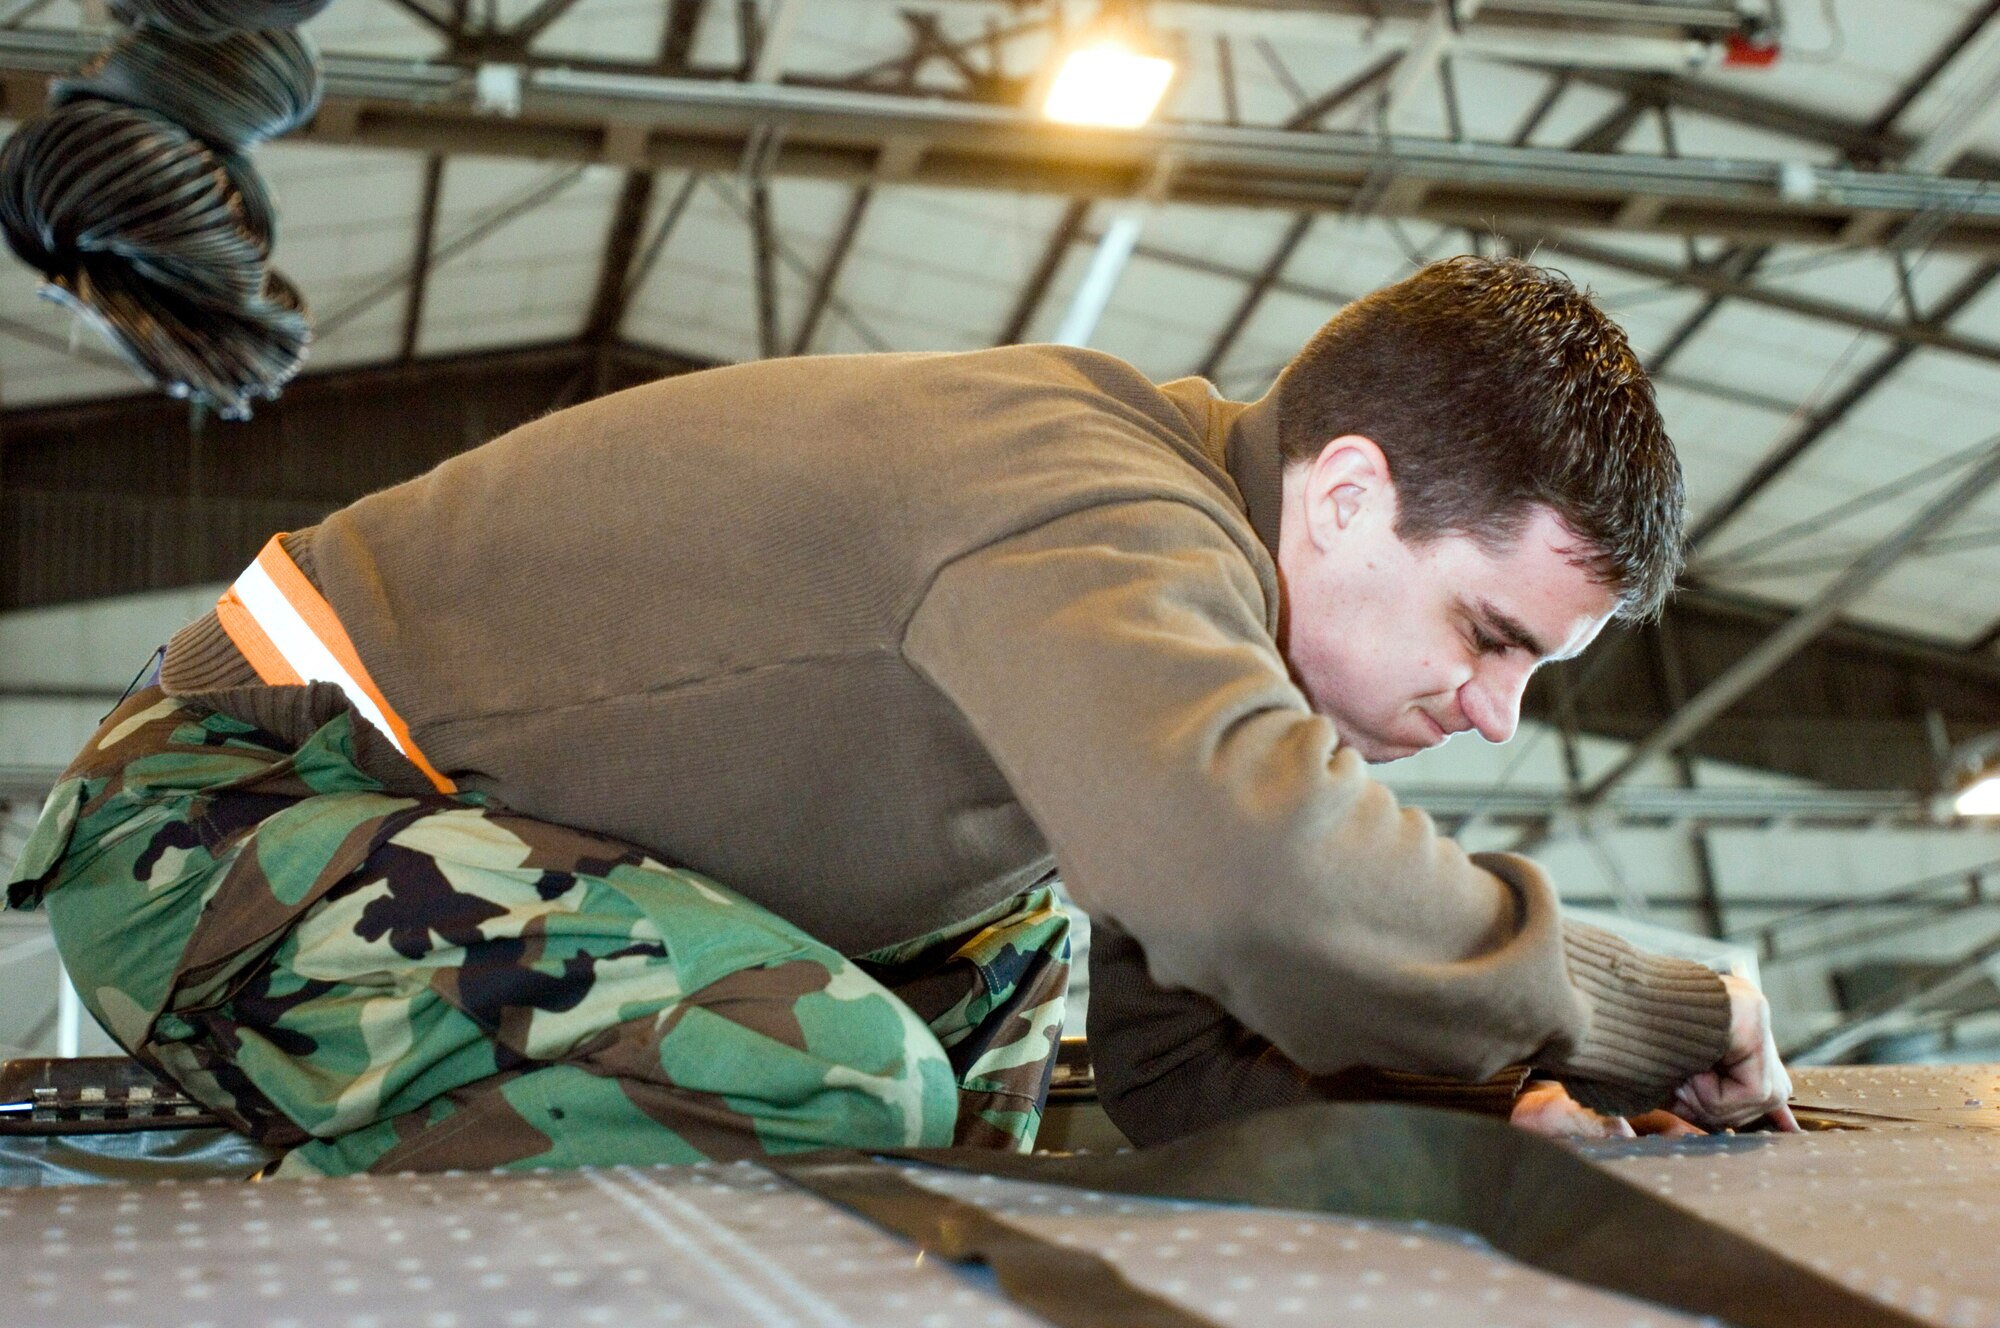 Senior Airman Andrew Tishim installs a life raft on a C-130 Hercules at Ramstein Air Base, Germany, on Monday, March 27, 2006. Airman Tishim is a Hercules crew chief with the 86th Aircraft Maintenance Squadron. (U.S. Air Force photo/Master Sgt. John E. Lasky)